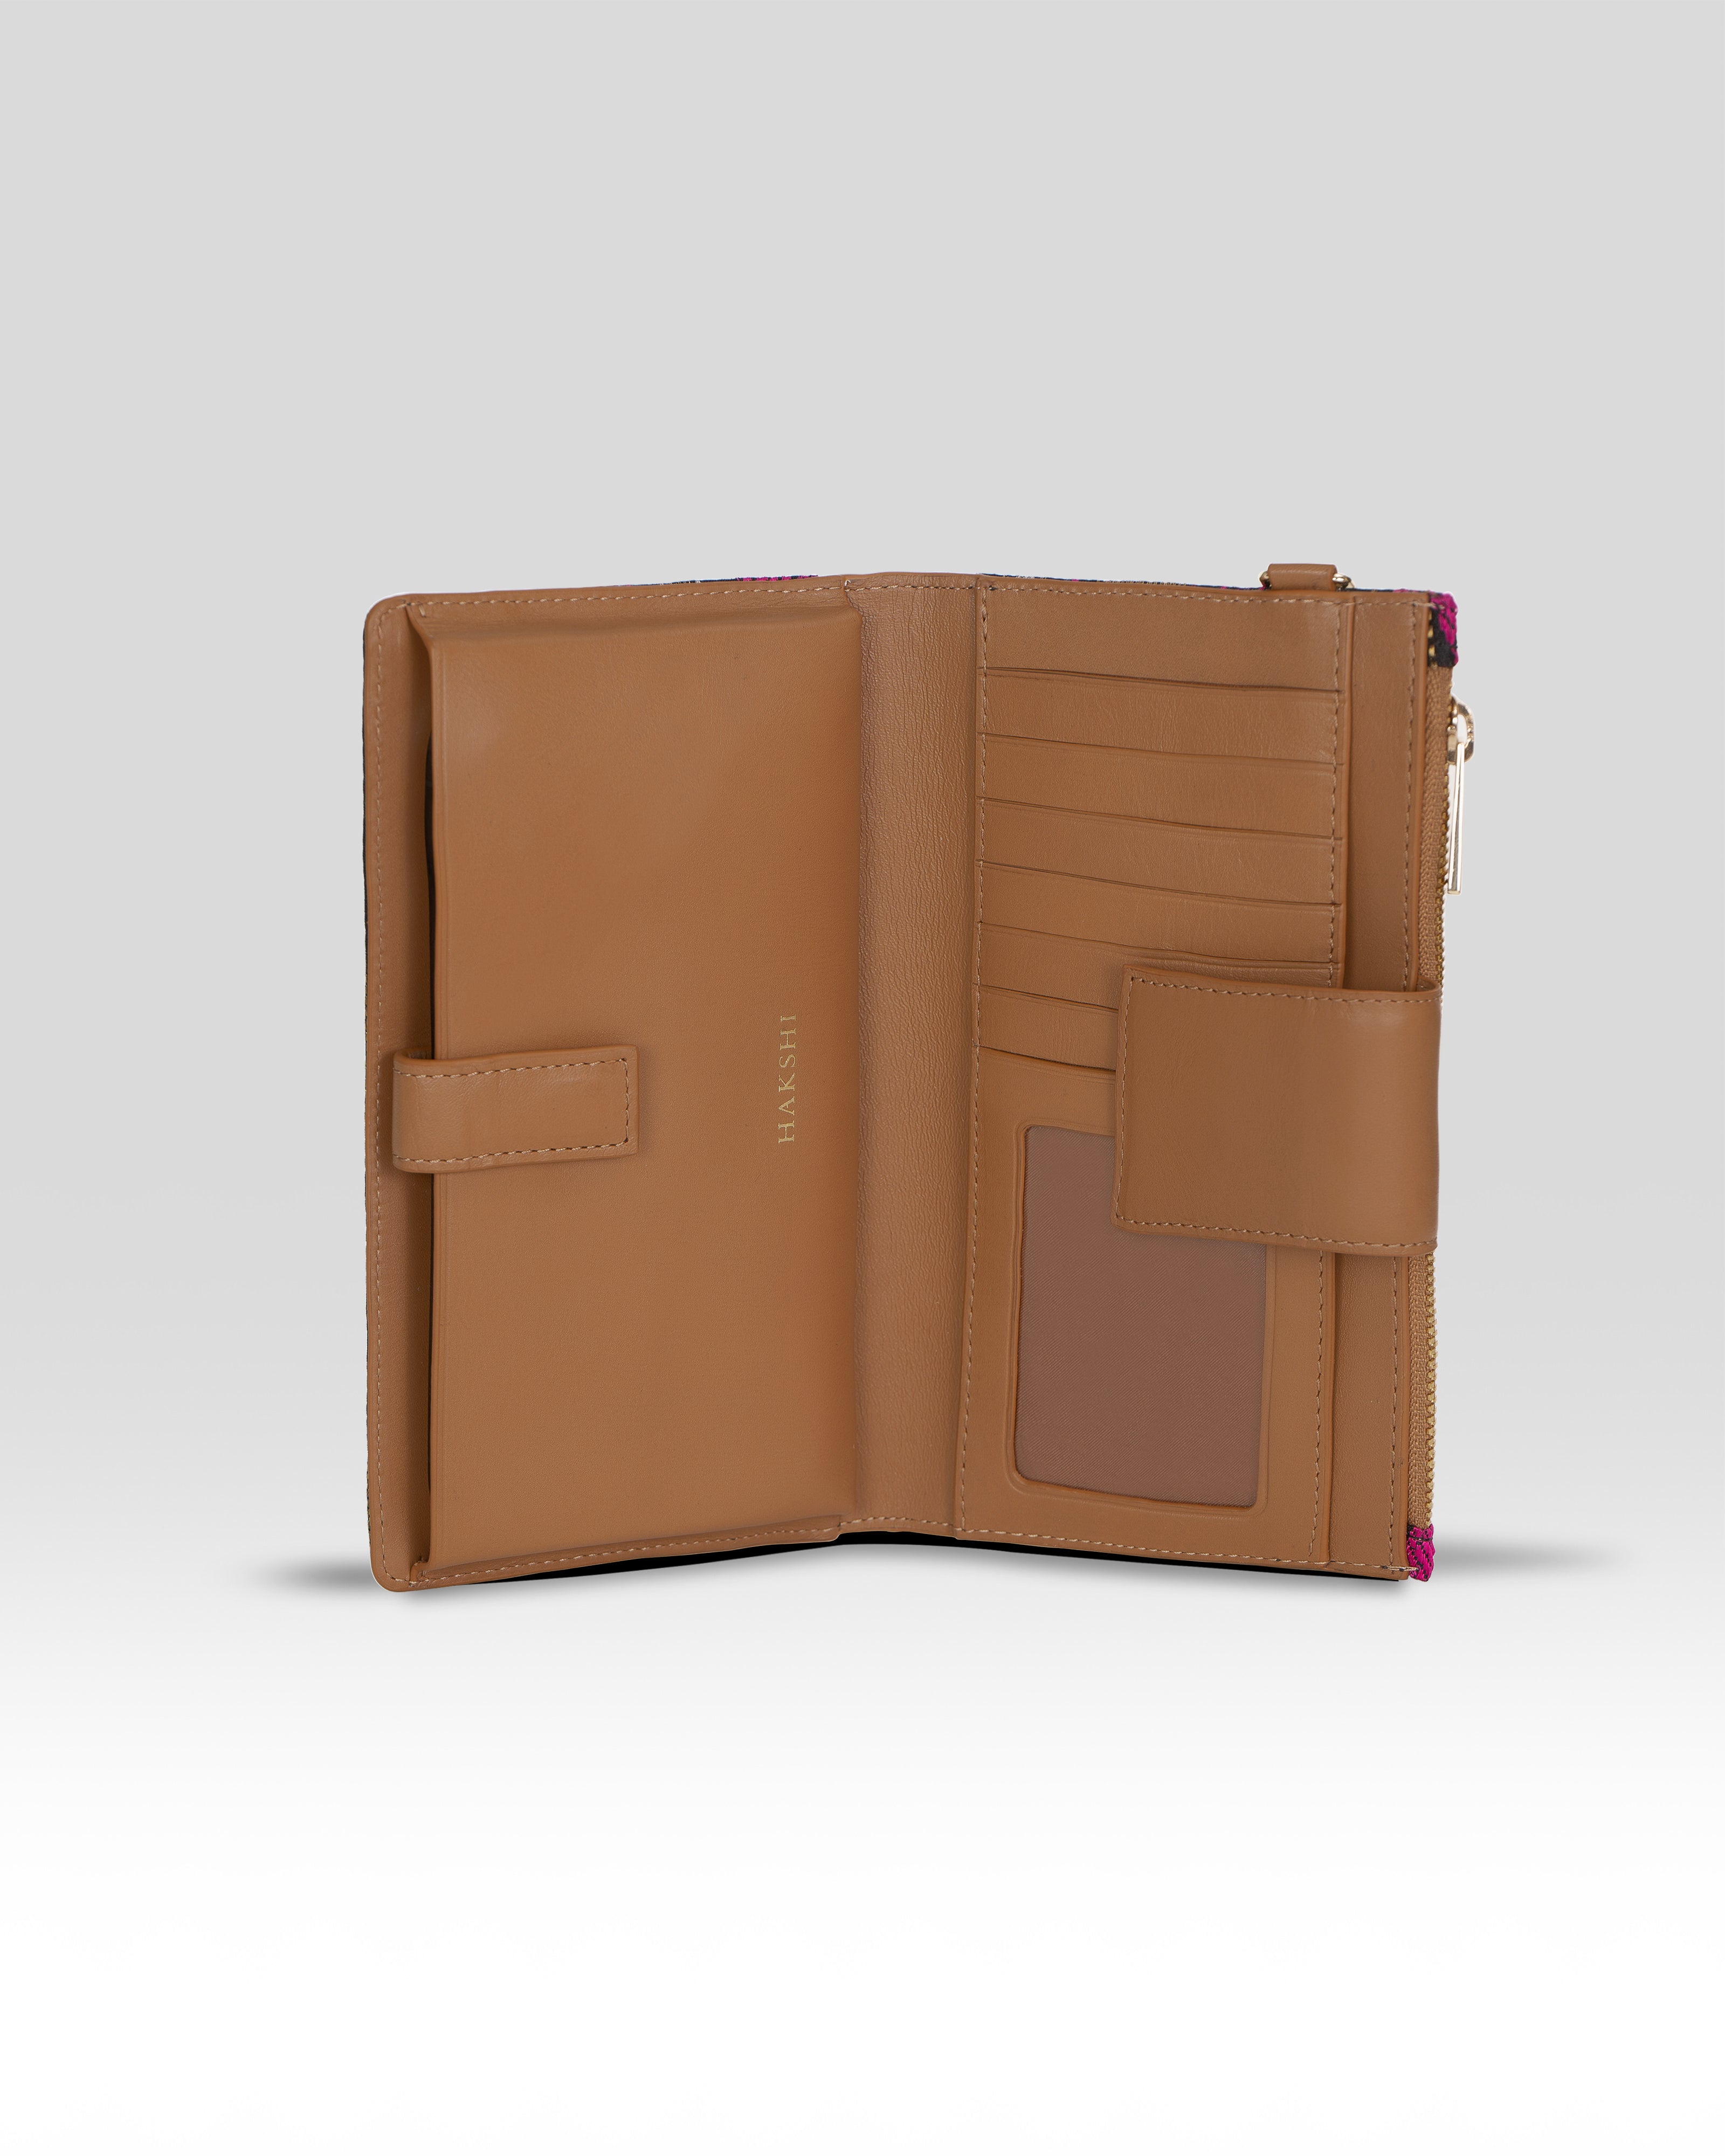 Stylish and Functional Accessory Crafted from Premium Quality Leather, Perfect for Organizing Essentials with Elegance